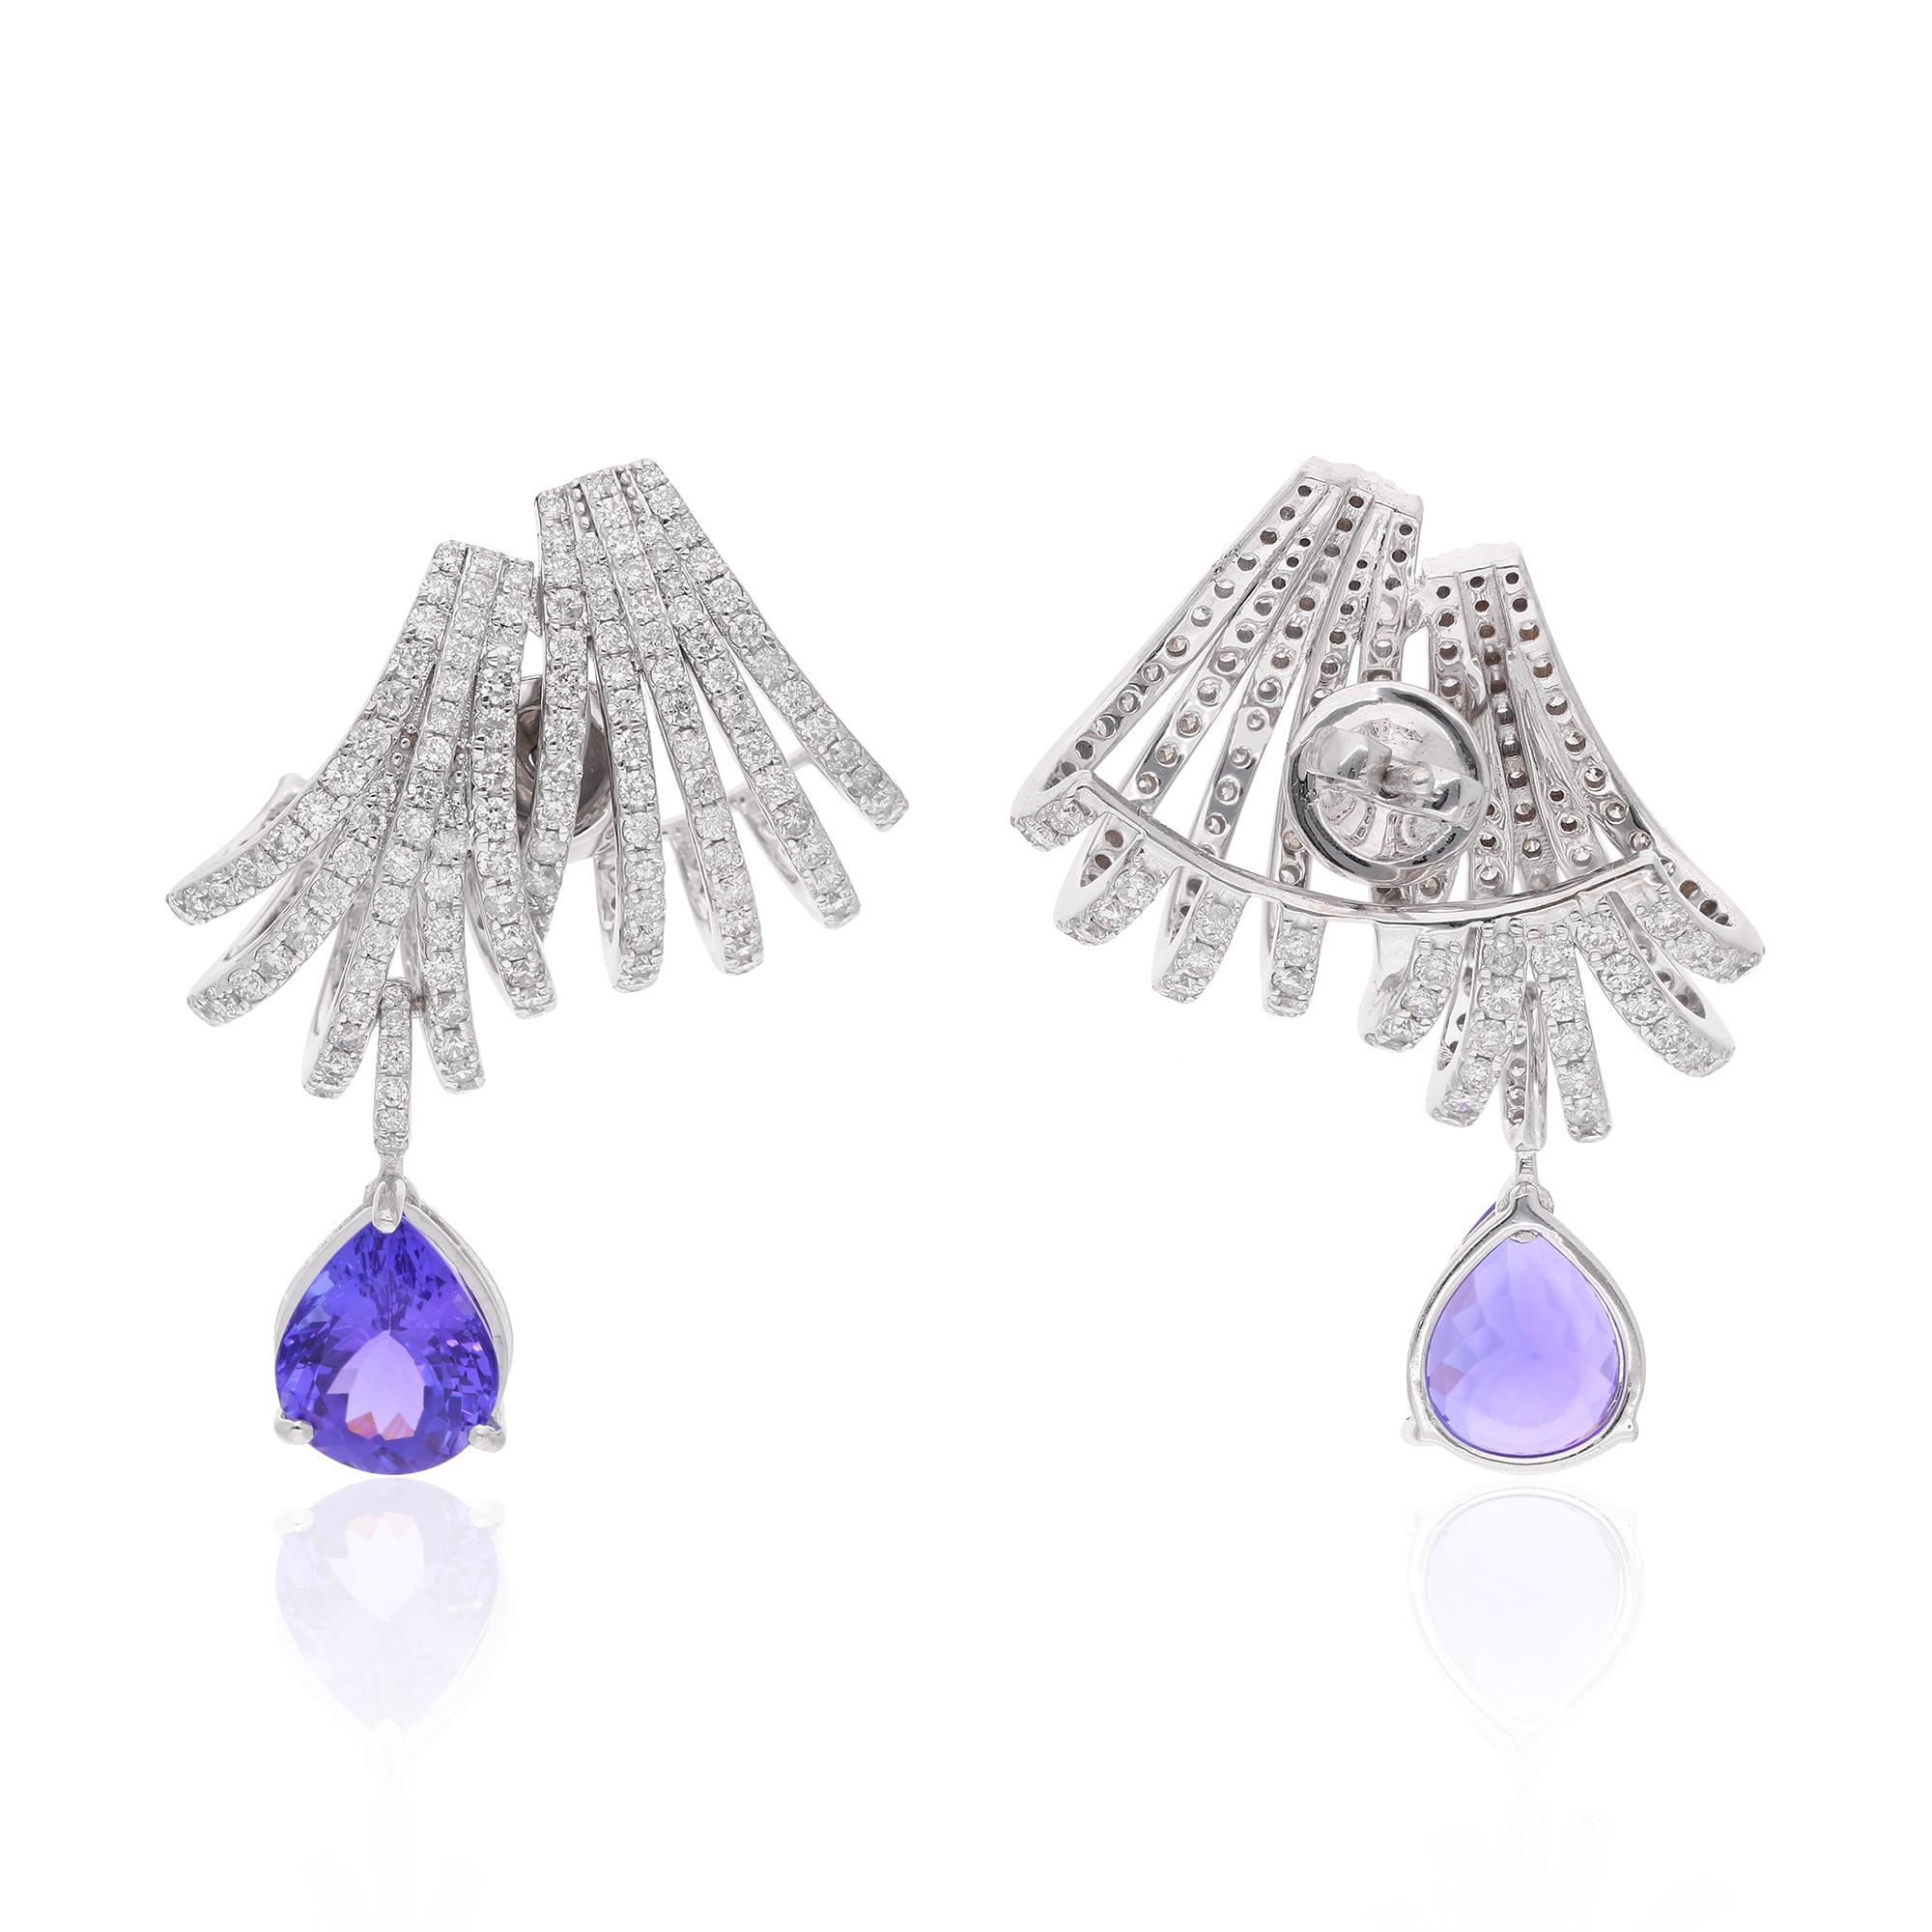 Dive into the magical temptation of this stunning Earrings in attractive shape and design made of White Gold studded with Diamond. An essential ornament to add in your jewellery collection!

✧✧Welcome To Our Shop Spectrum Jewels India✧✧

